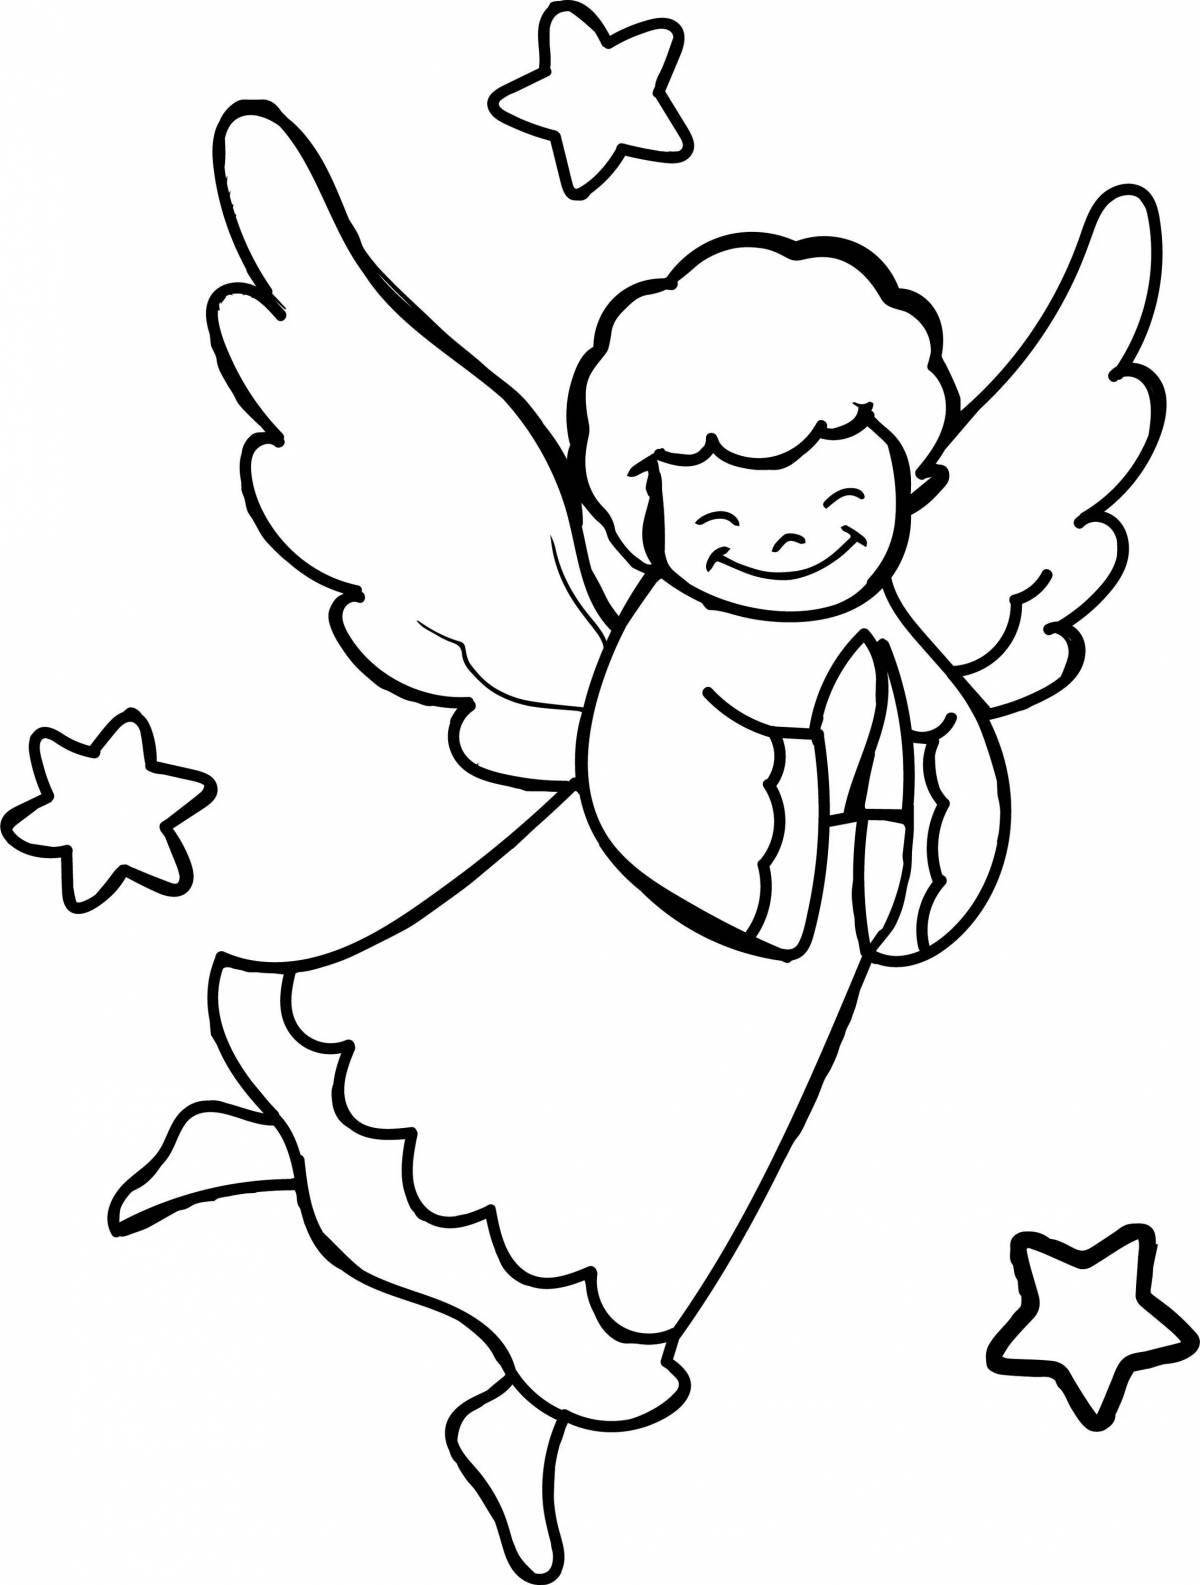 Angel with heavenly guidance for children